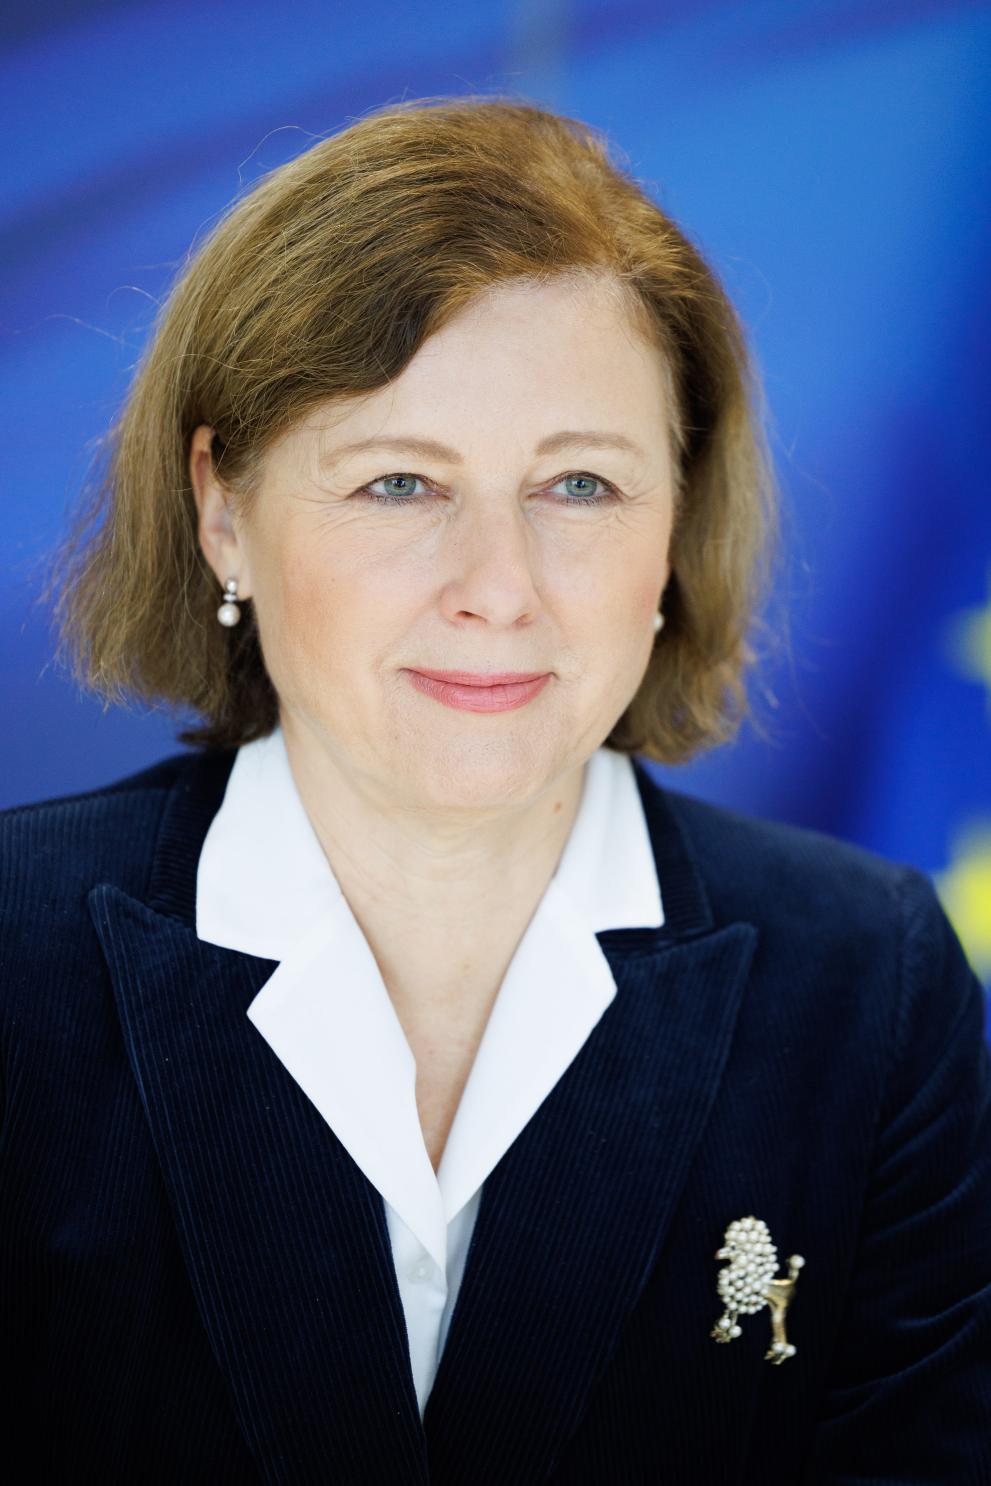 Visit of Sirpa Rautio, Chair of the European Network of National Human Rights Institutions, to the European Commission